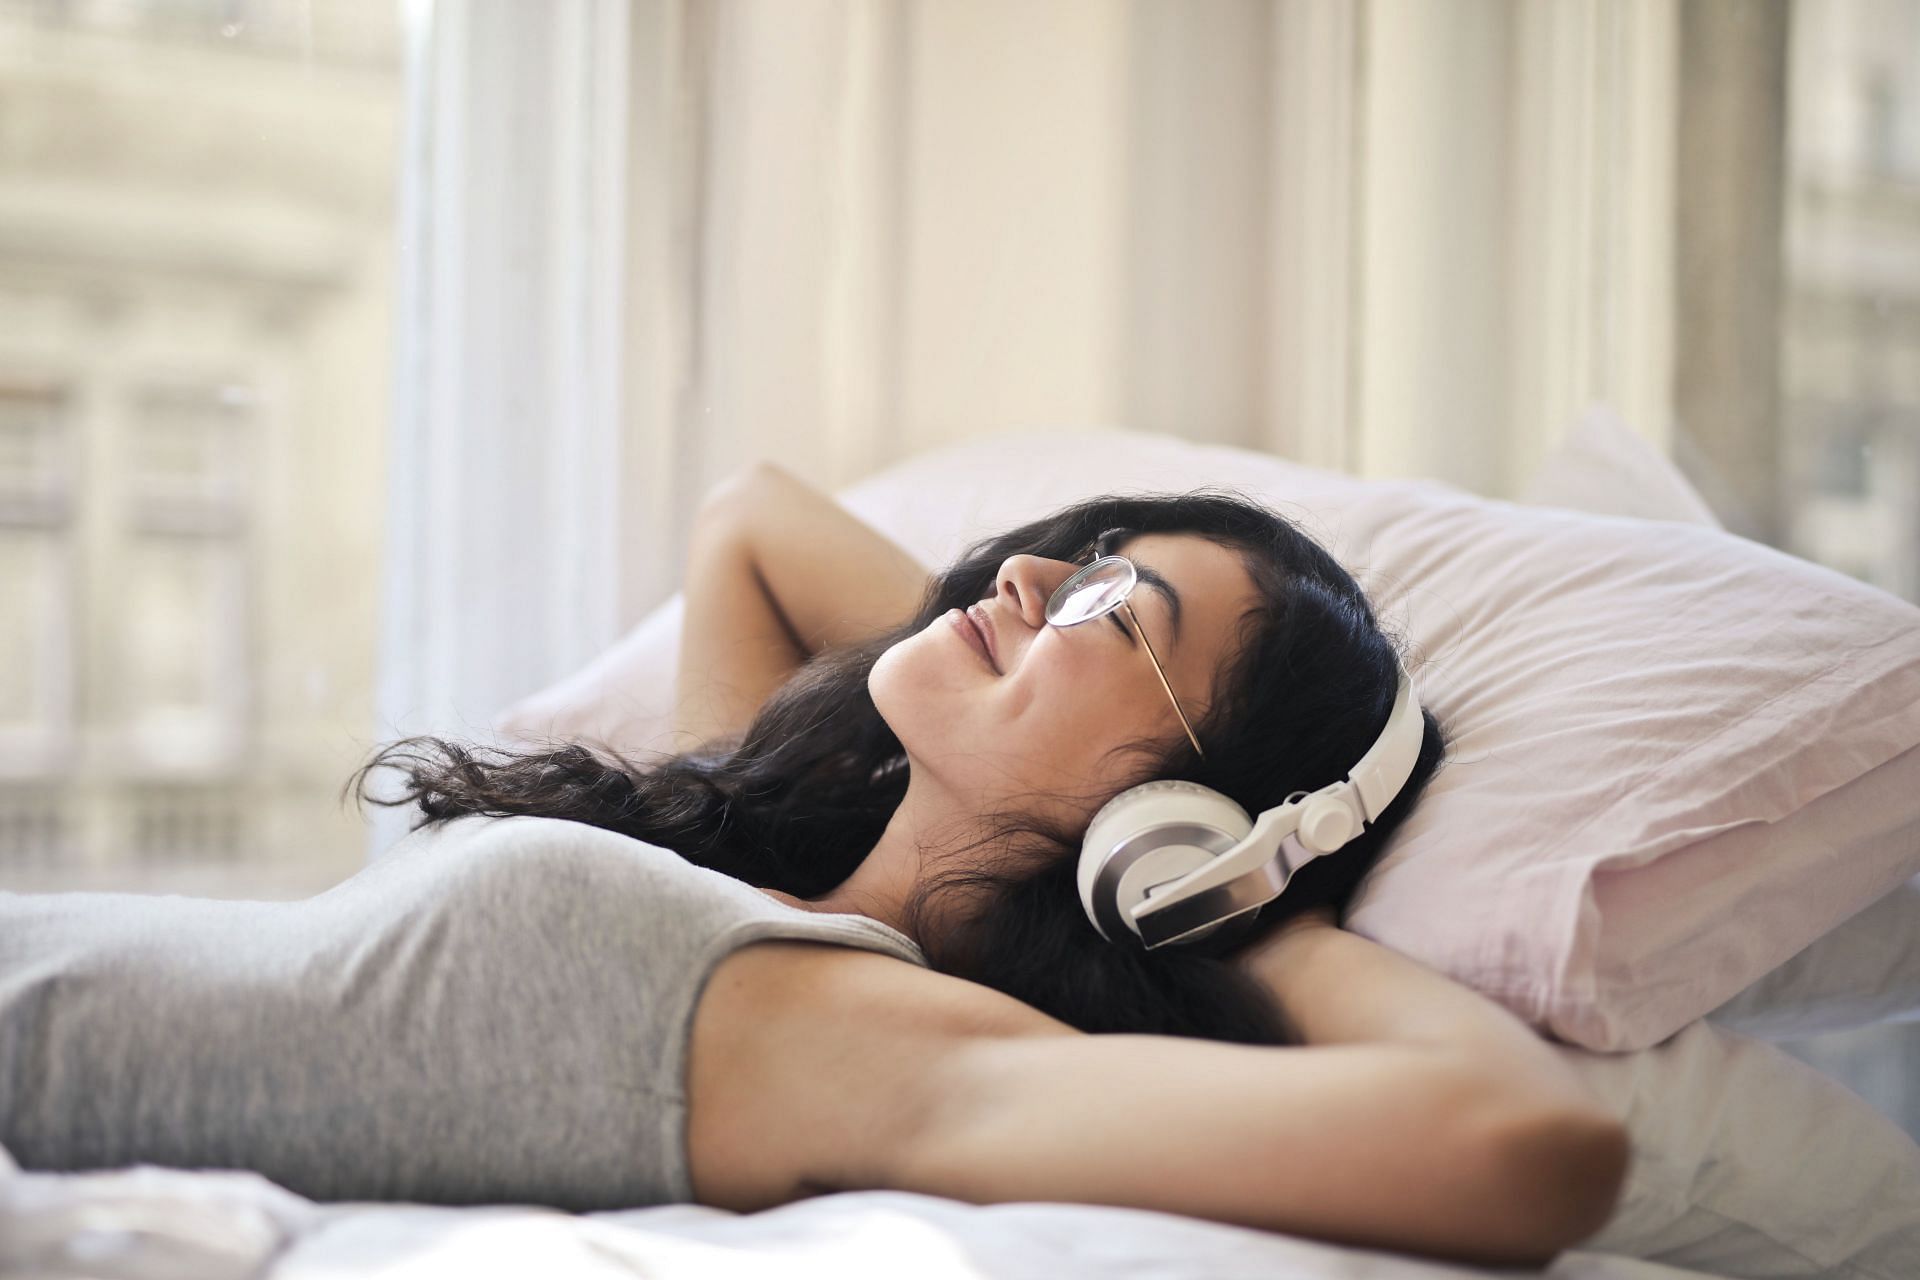 Music before bed (Image source/ Pexels)